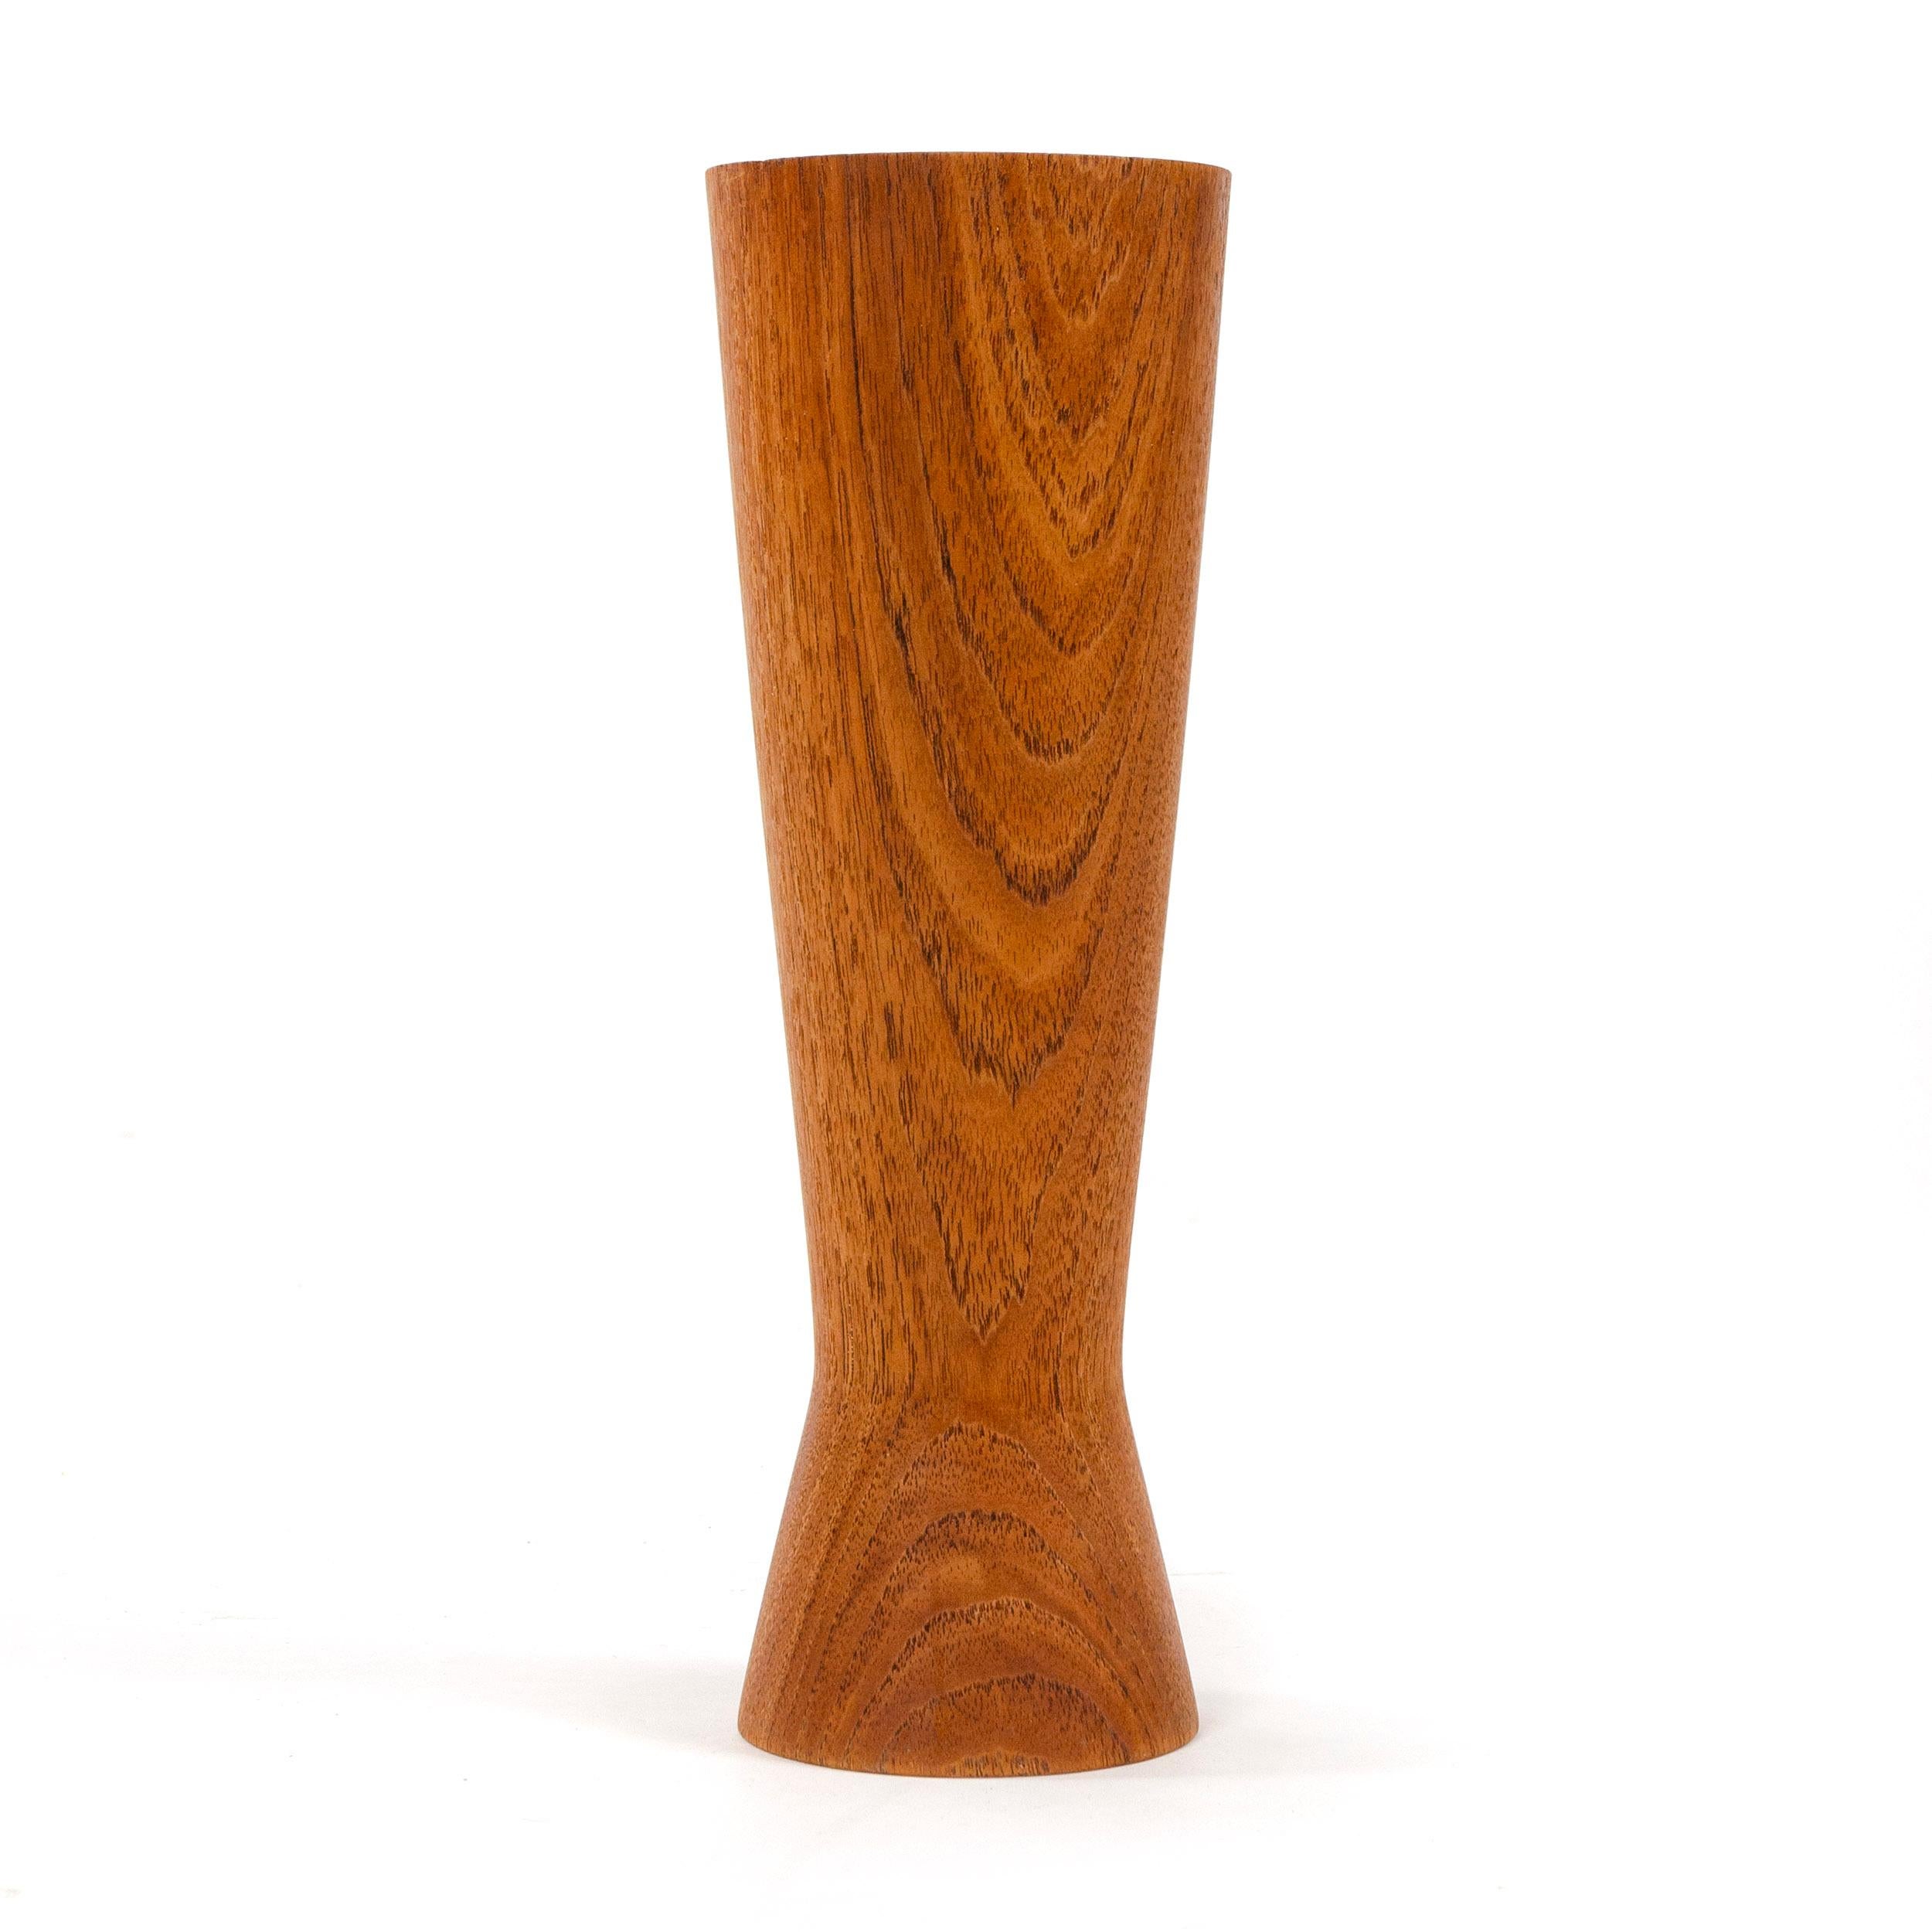 A turned teak vase with a cinched waist.